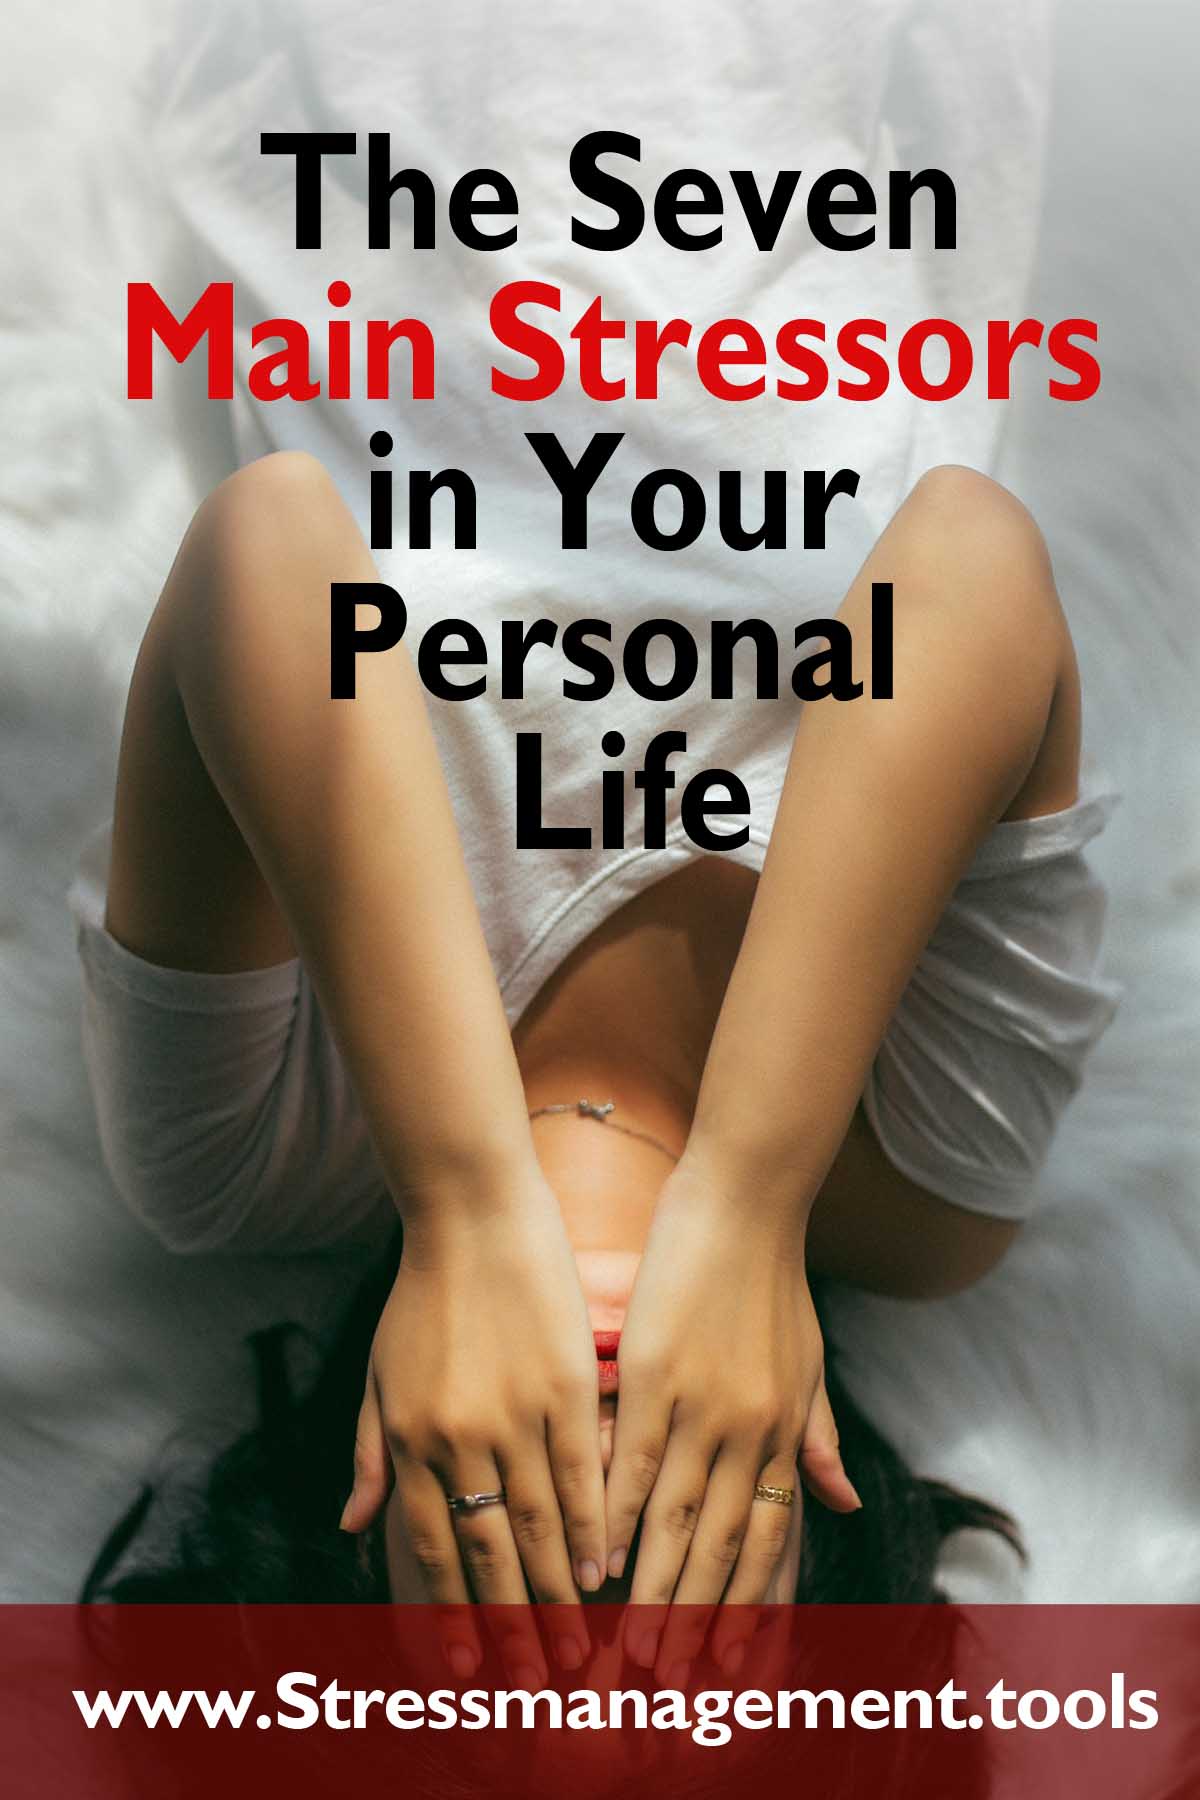 The Seven Main Stressors in Your Personal Life